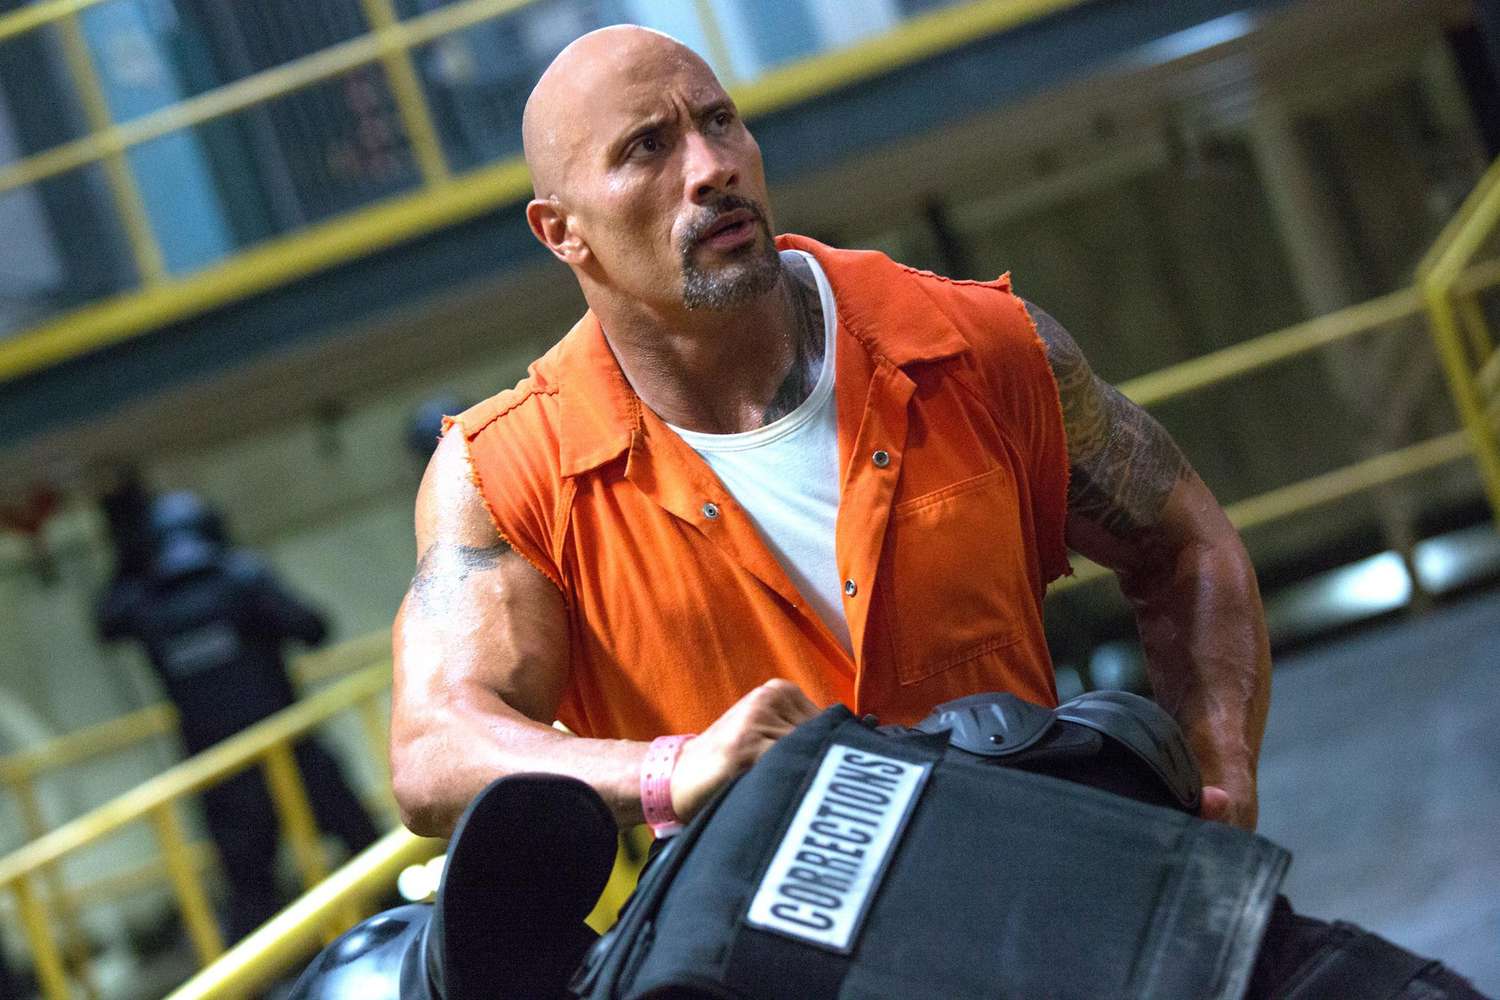 8. The Fate of the Furious (2017)